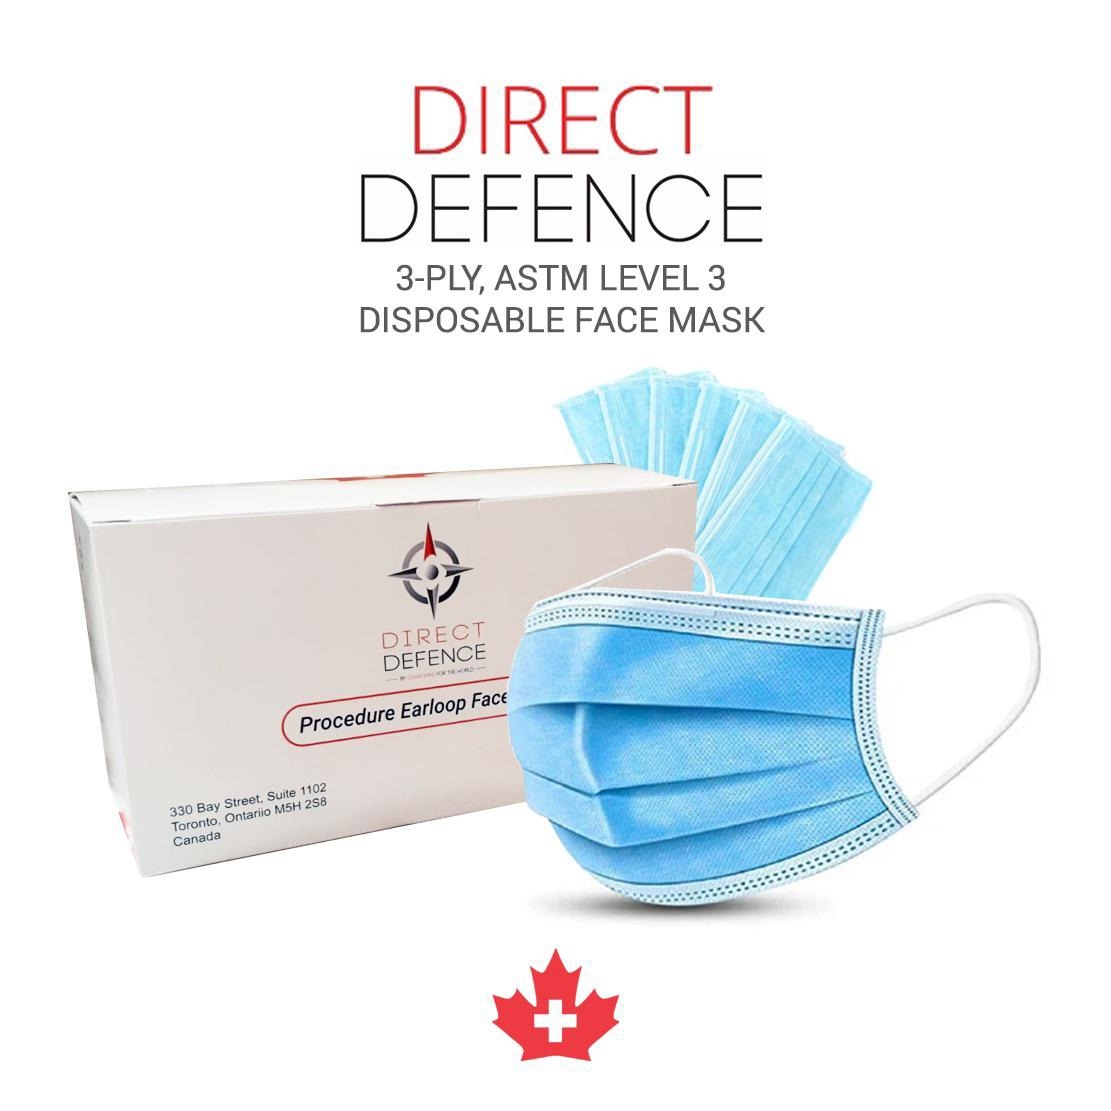 Direct Defence (MADE IN CANADA) 3-Ply, ASTM Level 3 Procedure Face Mask - Box of 50